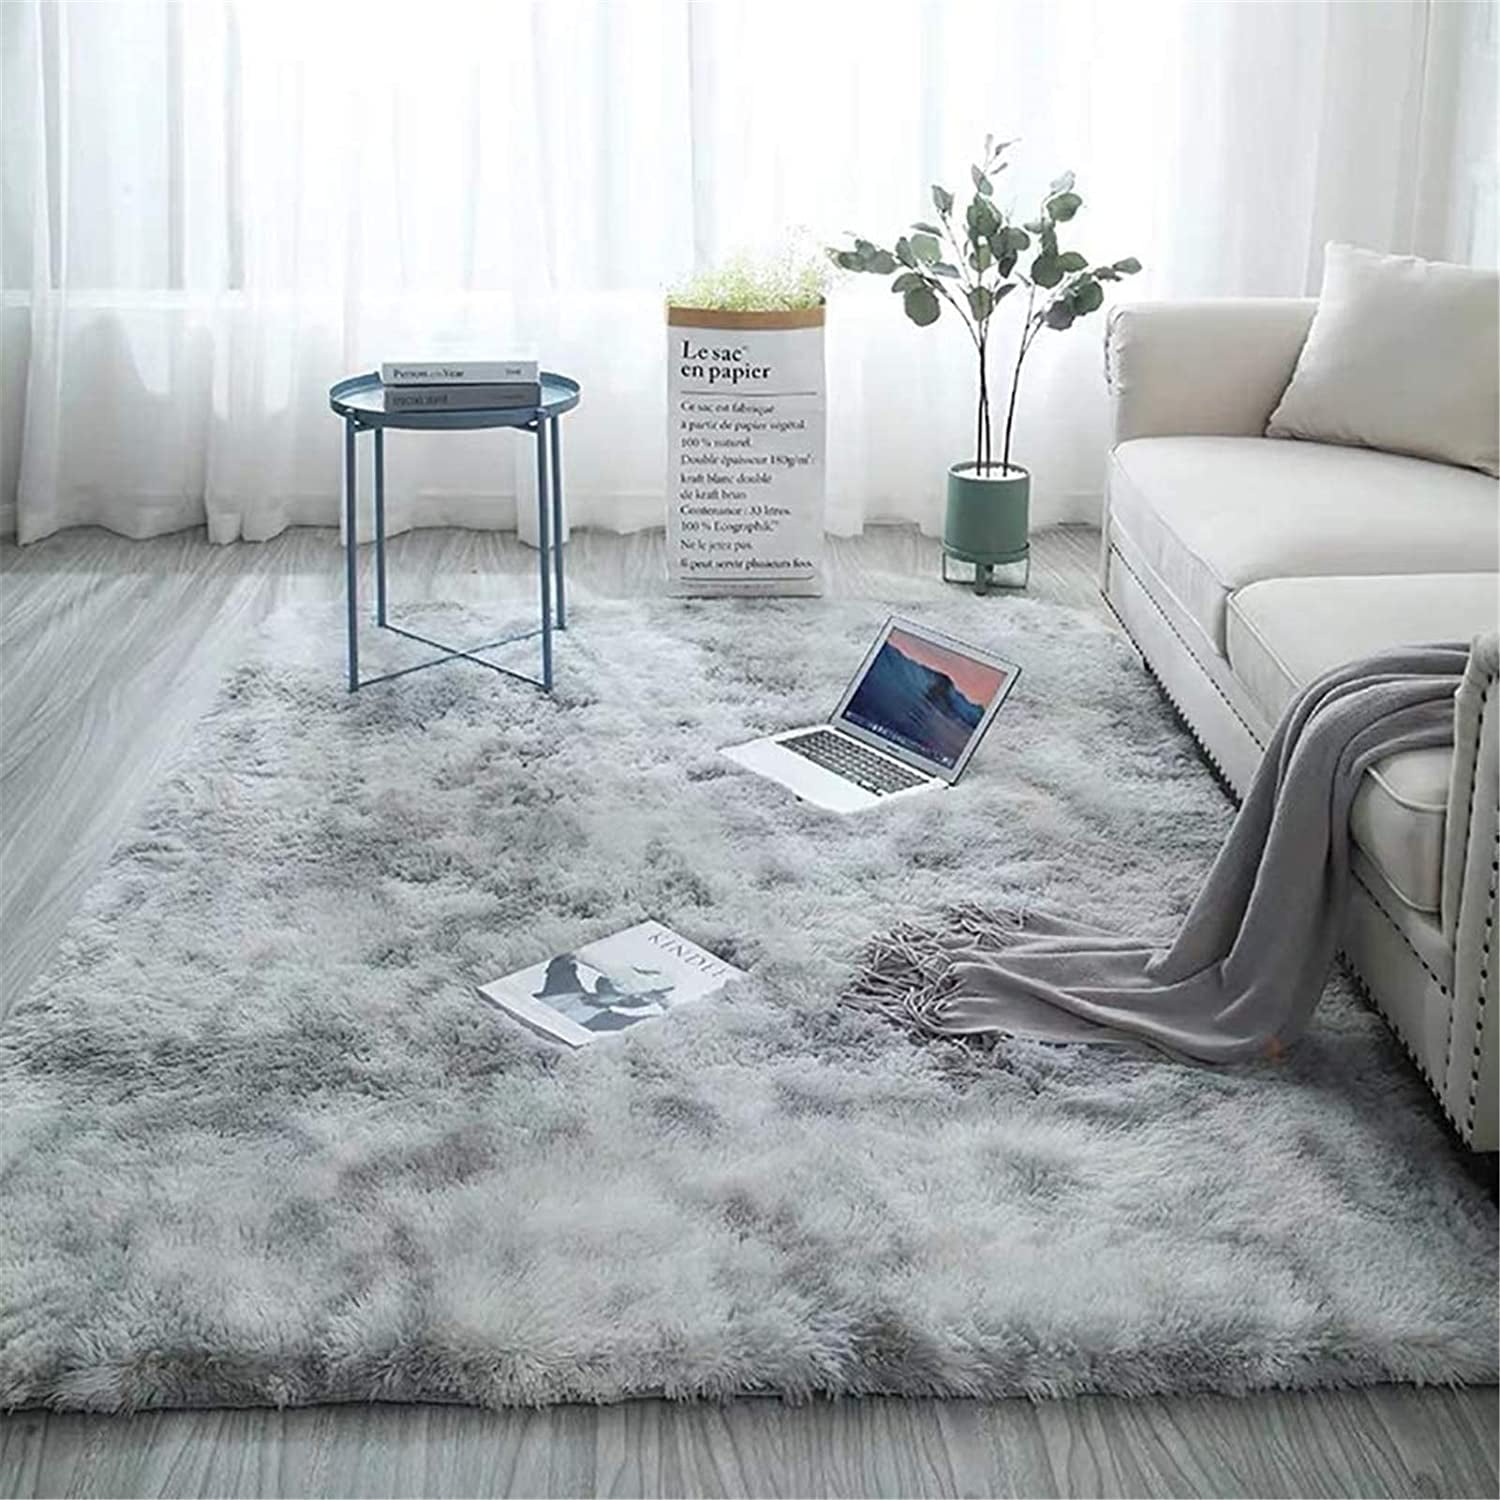 Comfy Fluffy Rugs Area Rug Living Room Carpet Home Bedroom Shaggy Mat Anti-Skid 